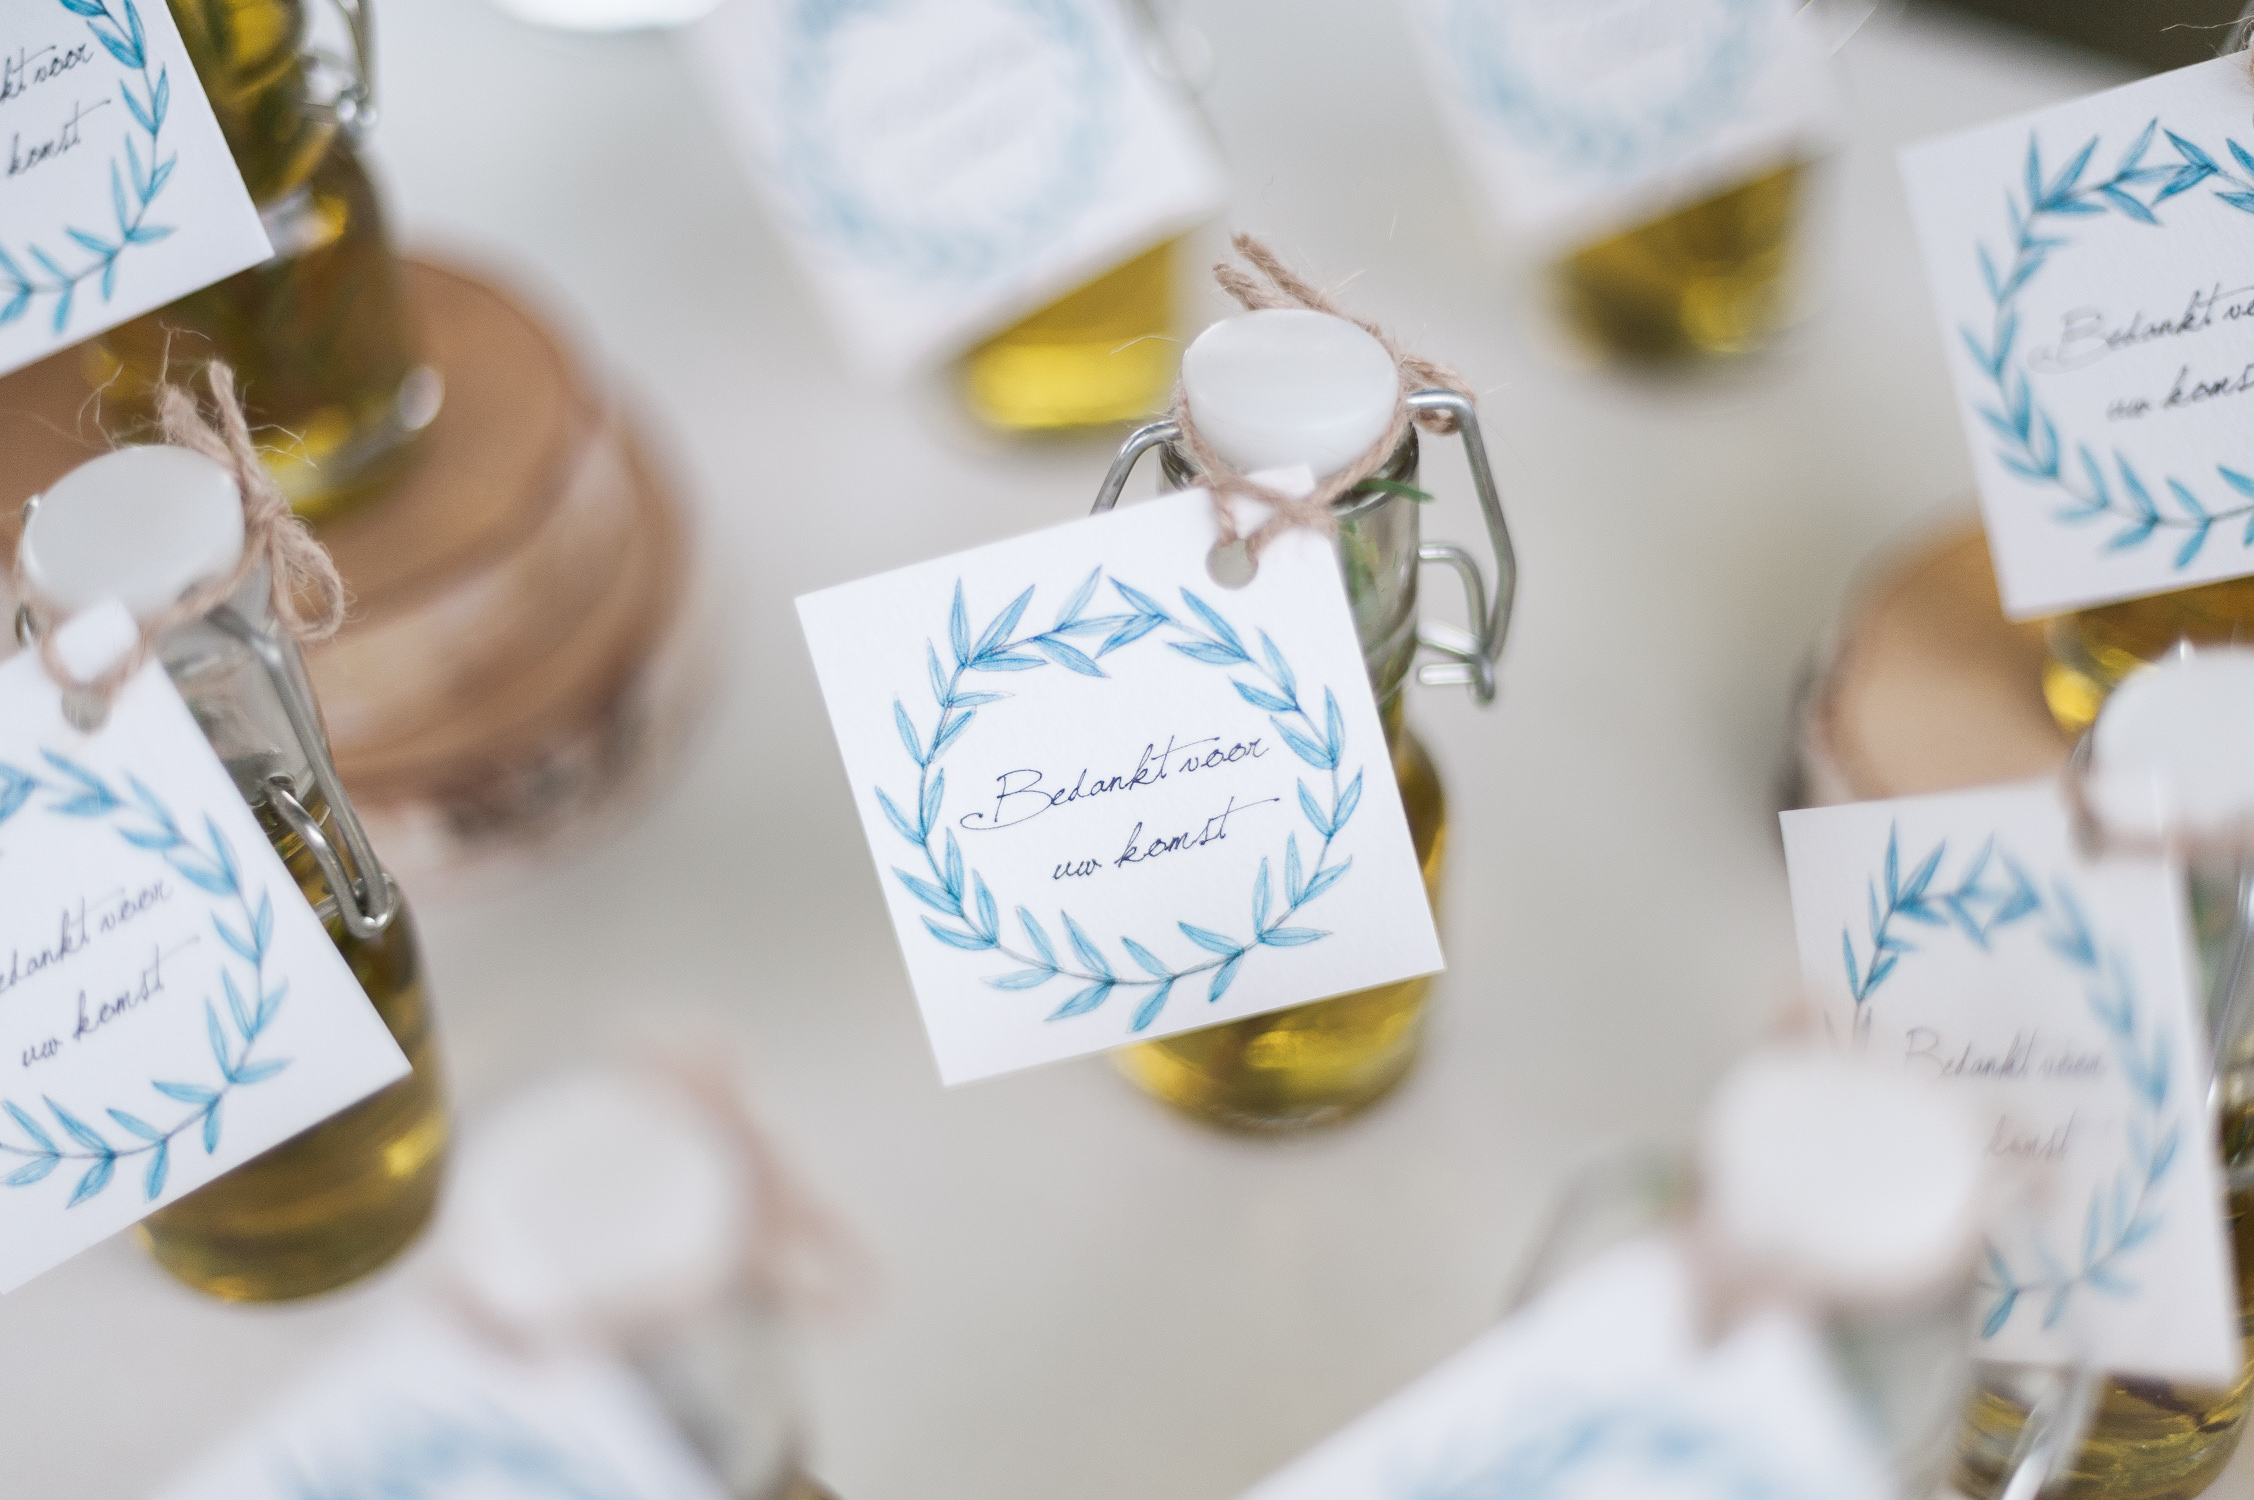 An olive oil bottle used as a giveaway at a destination wedding in Greece